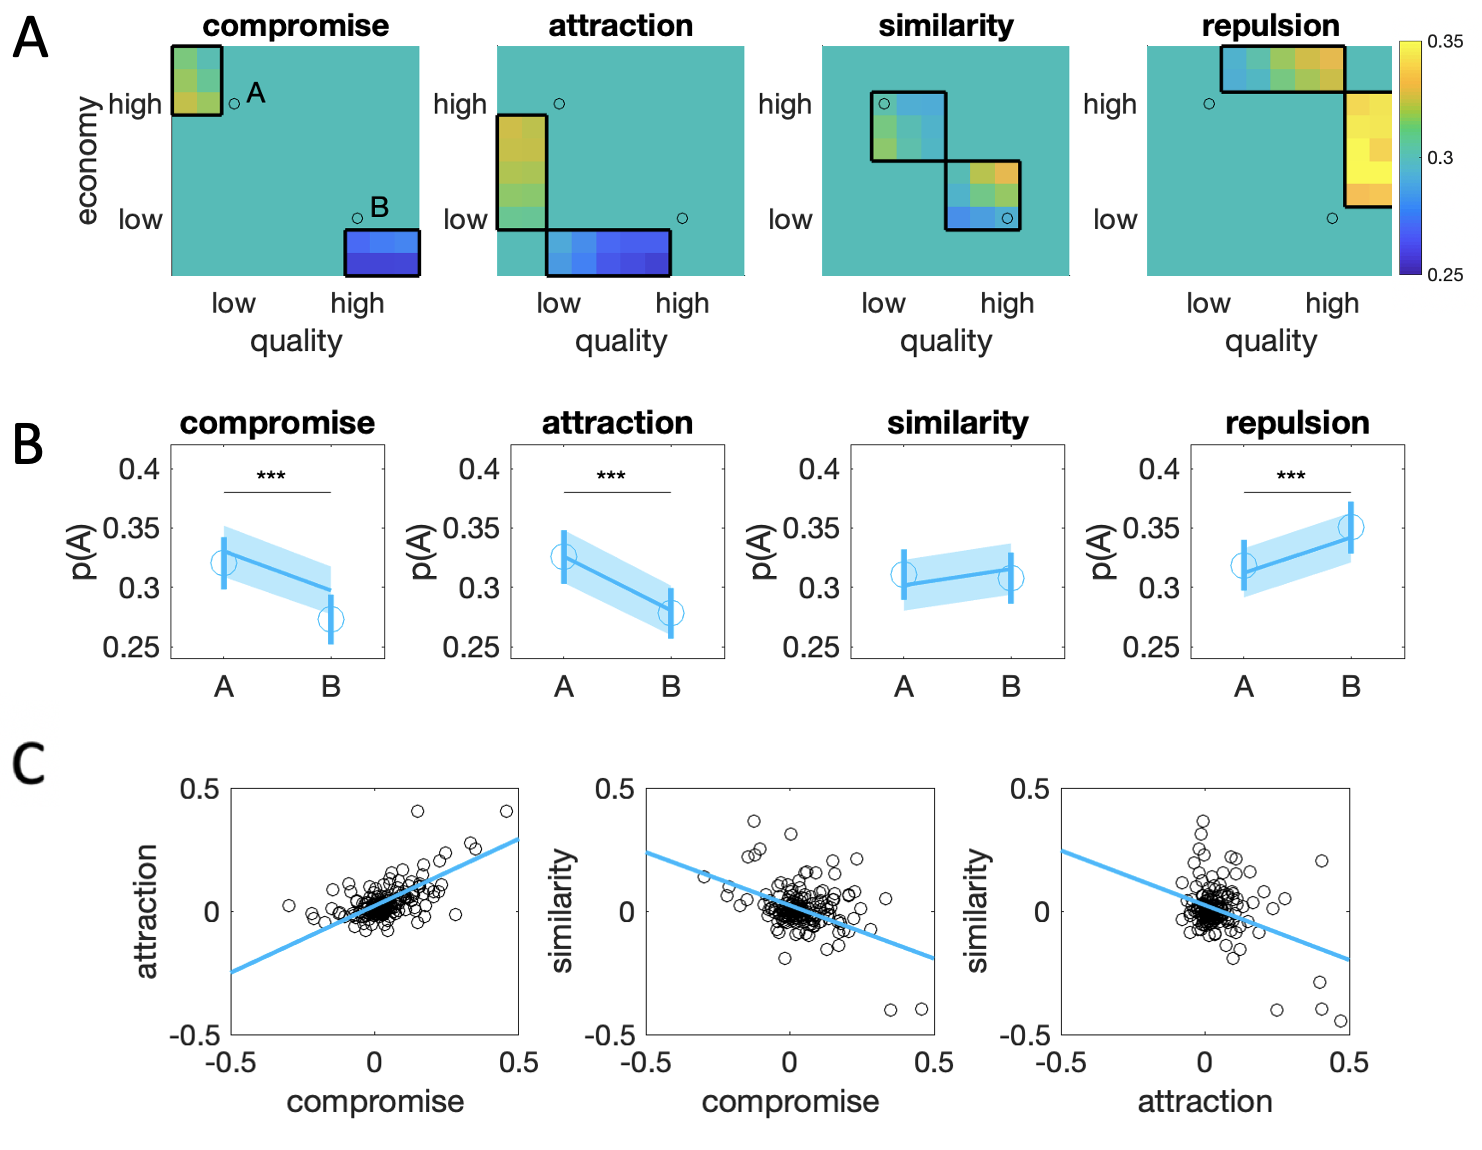 Conventional decoy analyses. $\textbf{A:}$ Each panel illustrates the chosen locations in decoy space for compromise ($D_c$), attraction ($D_a$), similarity ($D_s$) and repulsion ($D_r$) decoys (boxes). The blue-yellow color scale illustrates relative preference for target A over B (warmer colors) or vice versa (colder colors) at each location. Black circles indicate the locations of targets A and B.  $\textbf{B:}$ Average choice share for target A as a function of decoy location across $D_c$, $D_a$, $D_s$ and $D_r$. Blue dots are human data, shaded lines are model fit of adaptive gain model (see below). Bars/shaded area signal M±SEM *** indicates p < 0.001. $\textbf{C:}$ Correlations between the attraction, compromise and similarity effects. Each dot is a single participant; the decoy estimate is calculated as the difference between the RCS for given decoy with respect to targets A and B. 